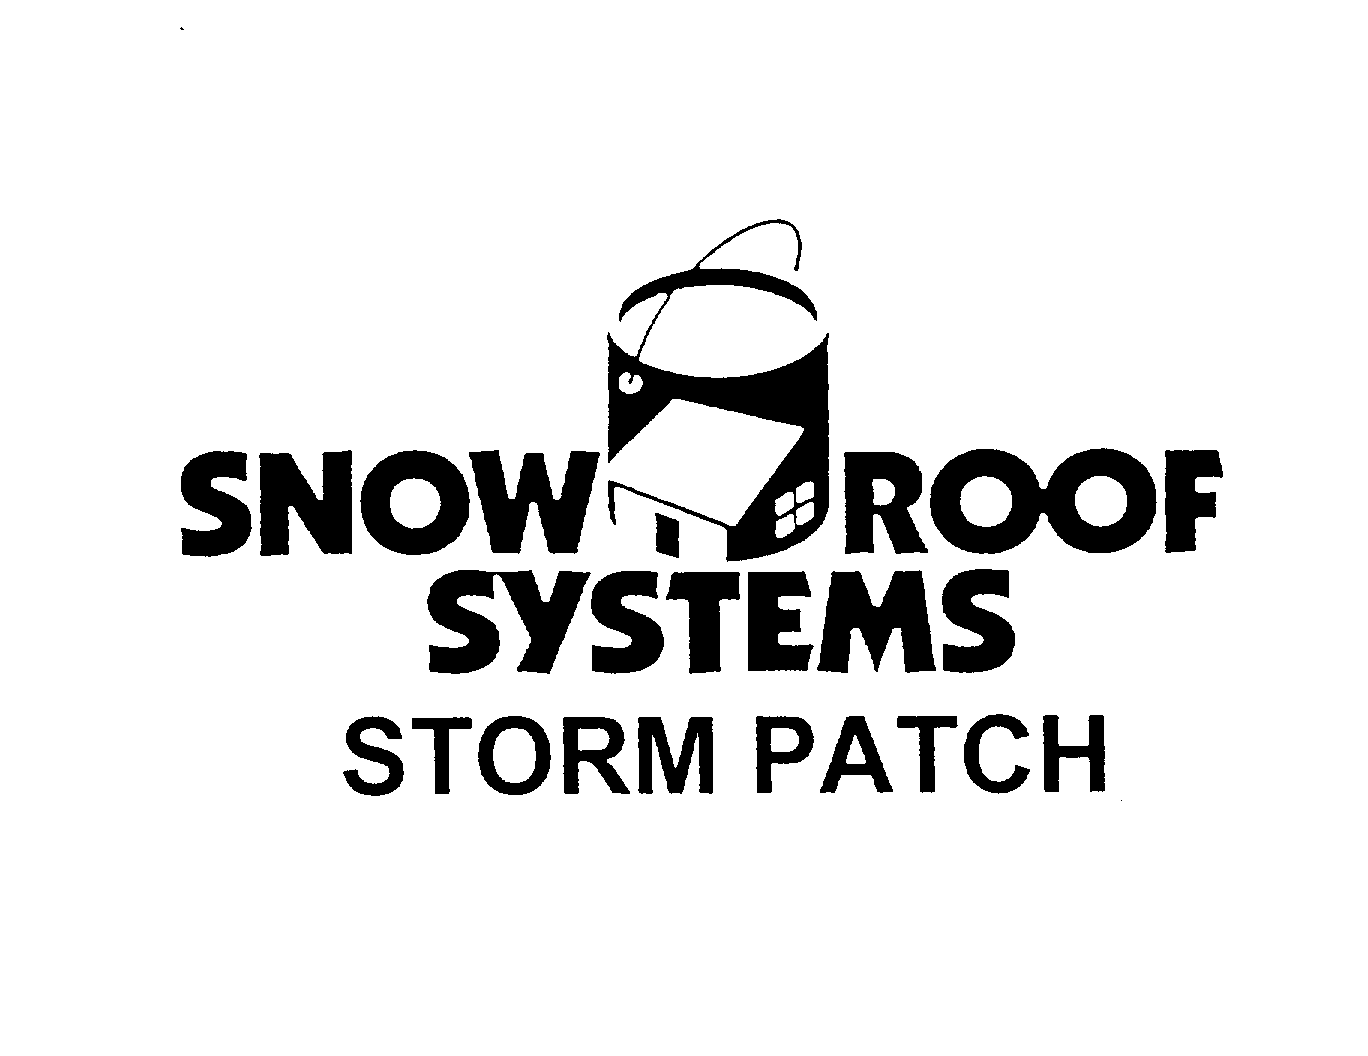  SNOW ROOF SYSTEMS STORM PATCH